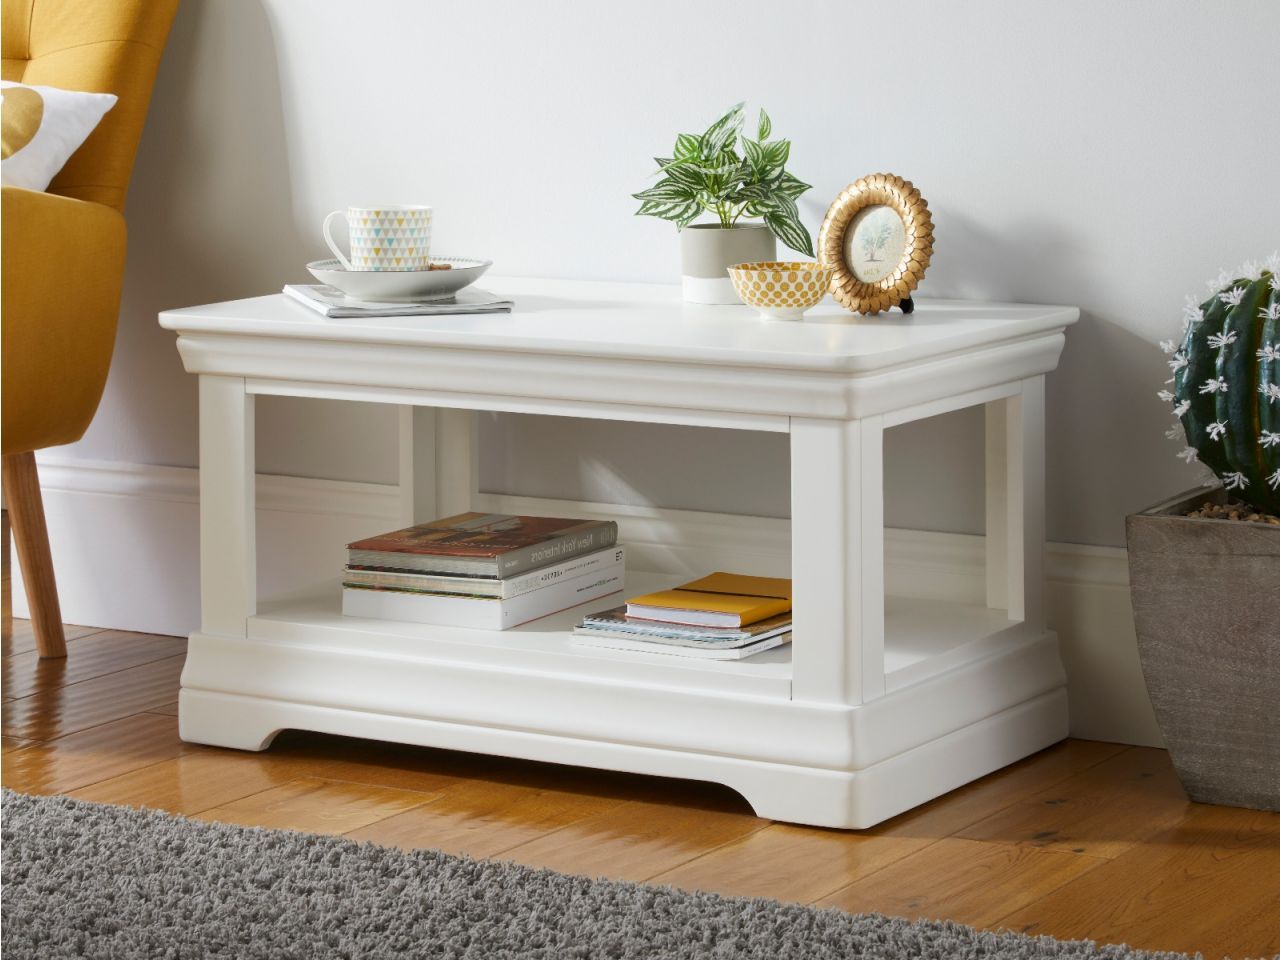 Toulouse White Painted Coffee Table With Shelf | Fully Assembled For Off White Wood Coffee Tables (View 8 of 20)